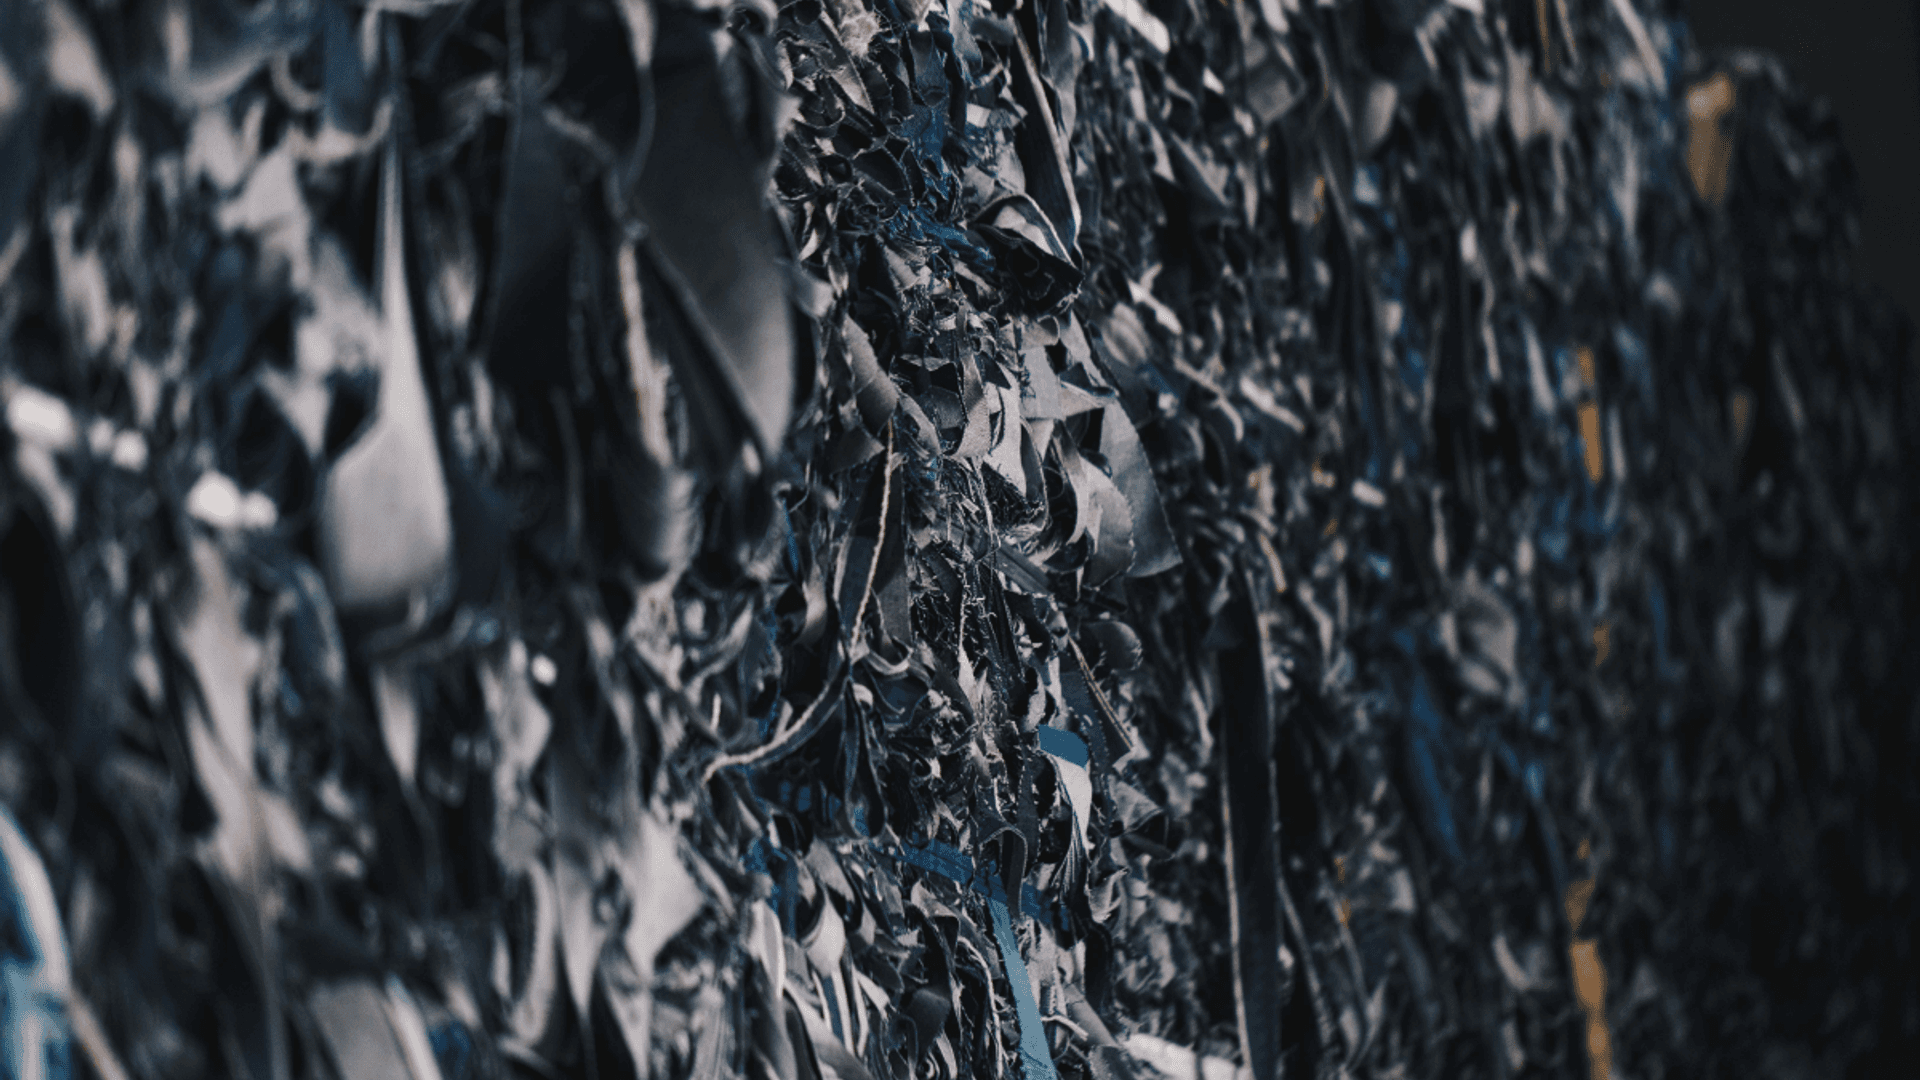 A close-up picture of denim textile waste (clips)